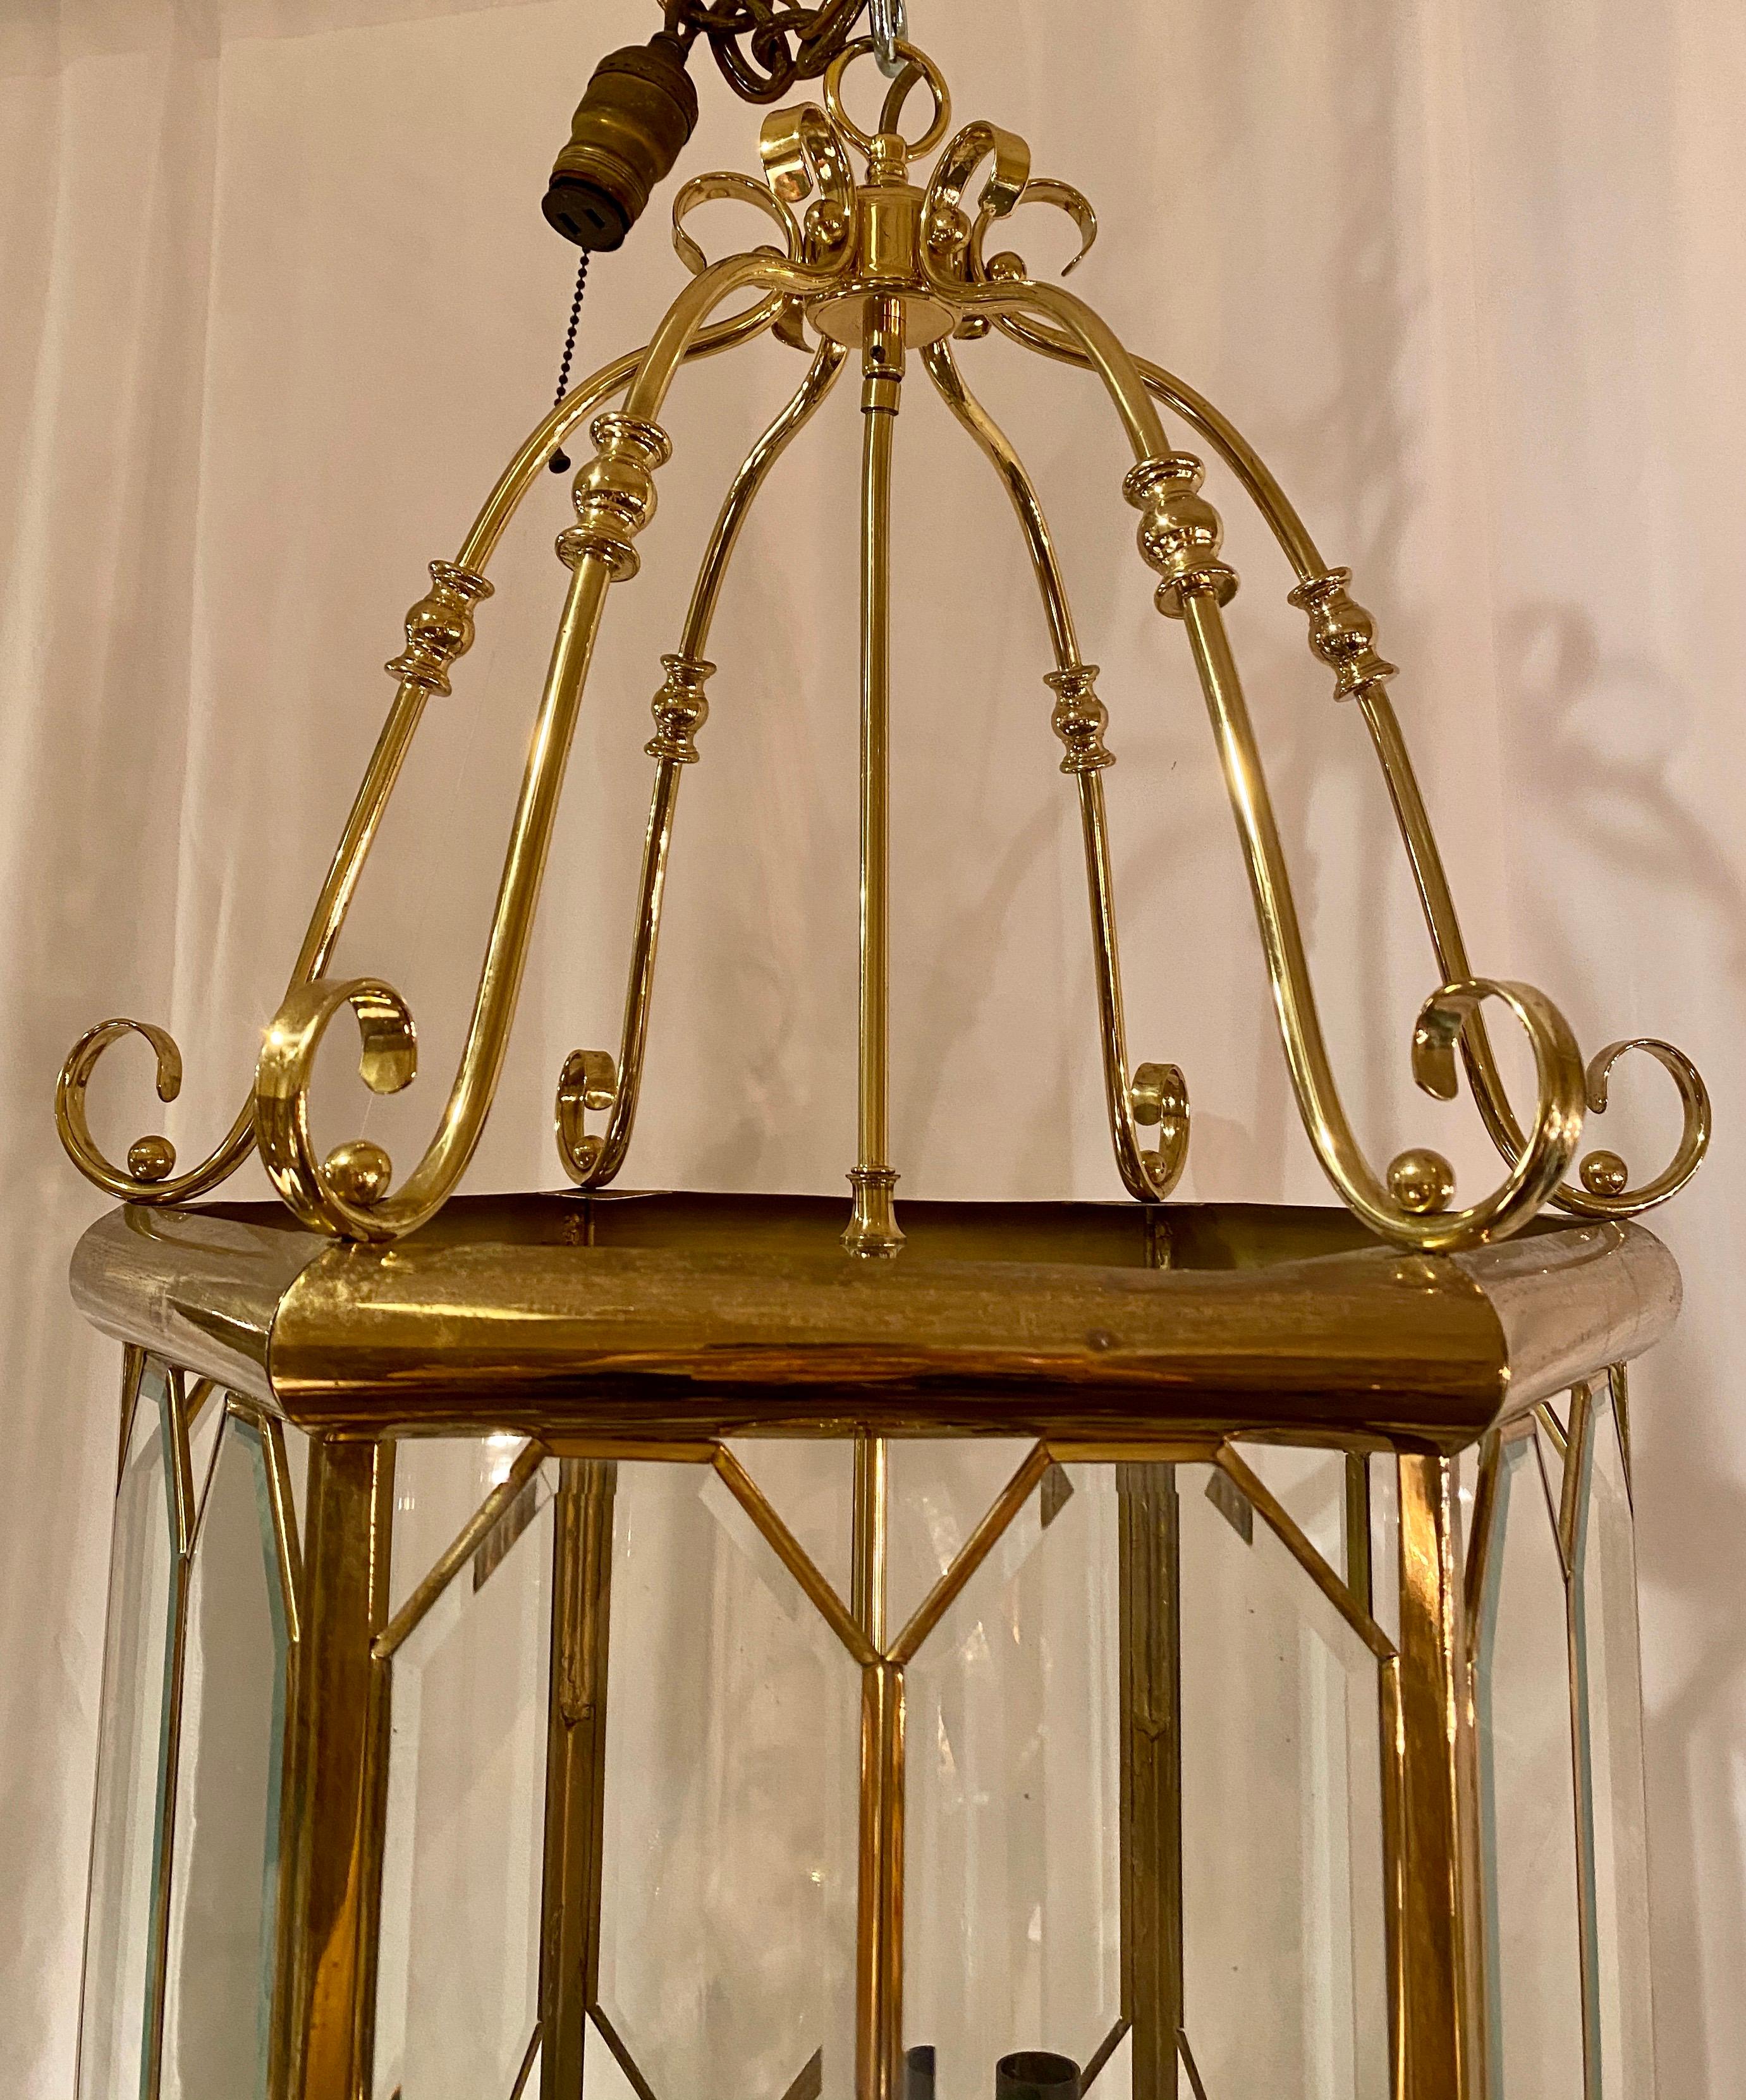 Estate Belgian architectural beveled glass and brass double-tier hall lantern.
LAN133.